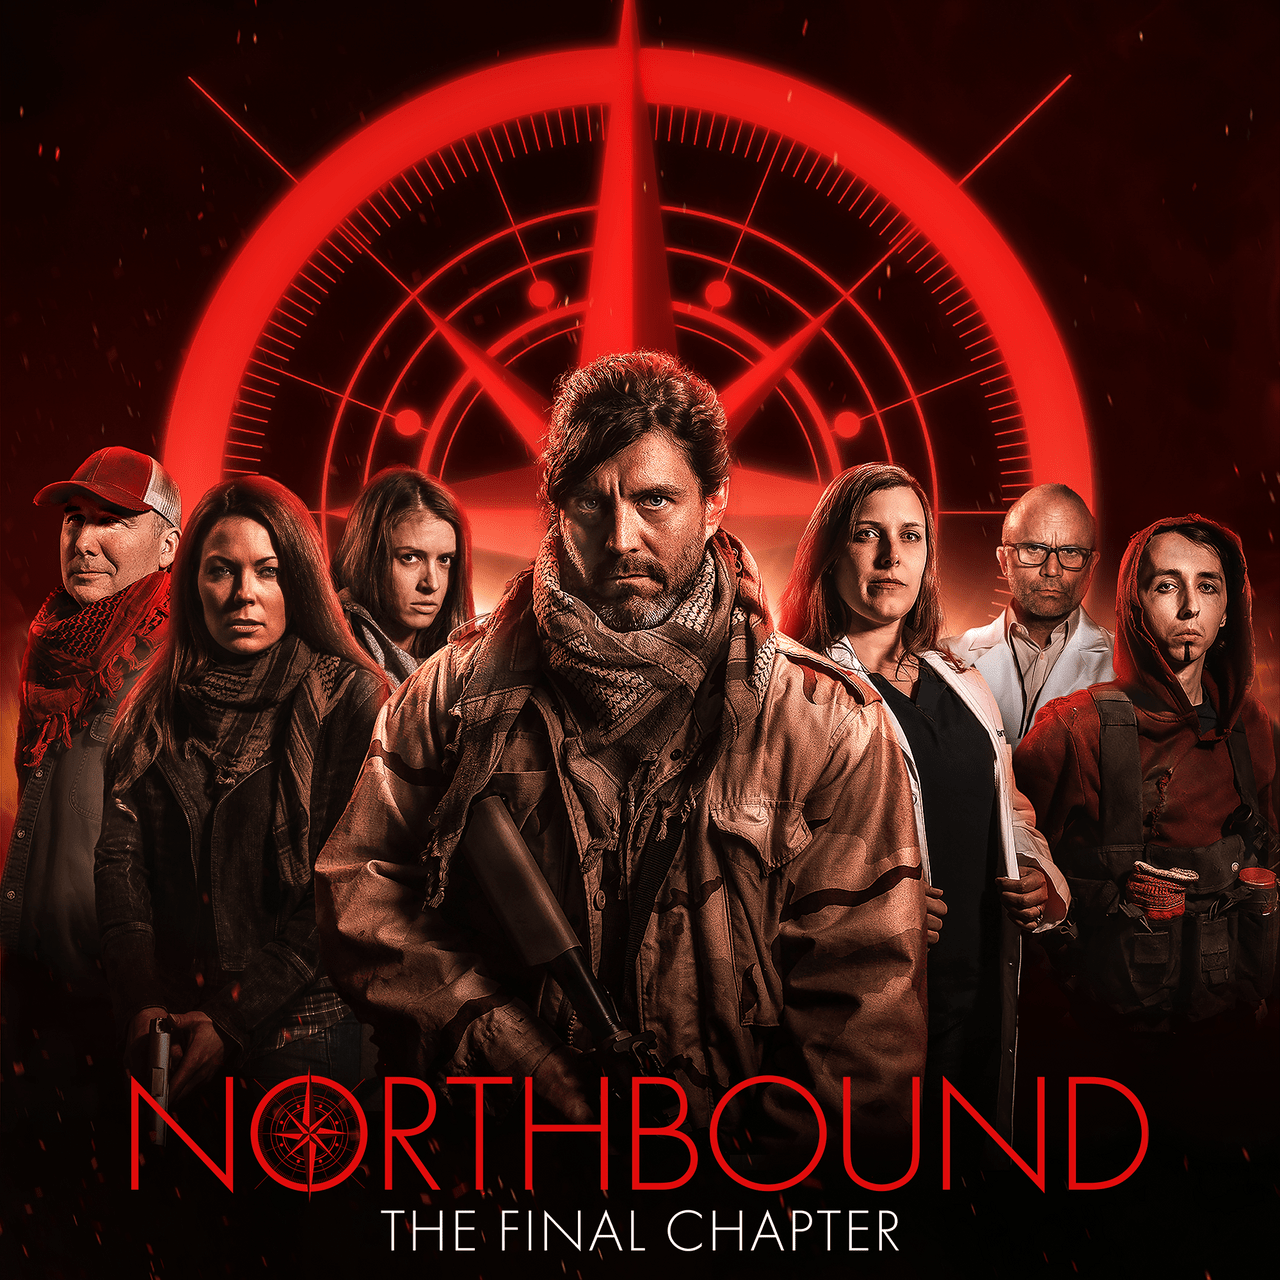 A promotional image for a film titled Northbound: The Final Chapter